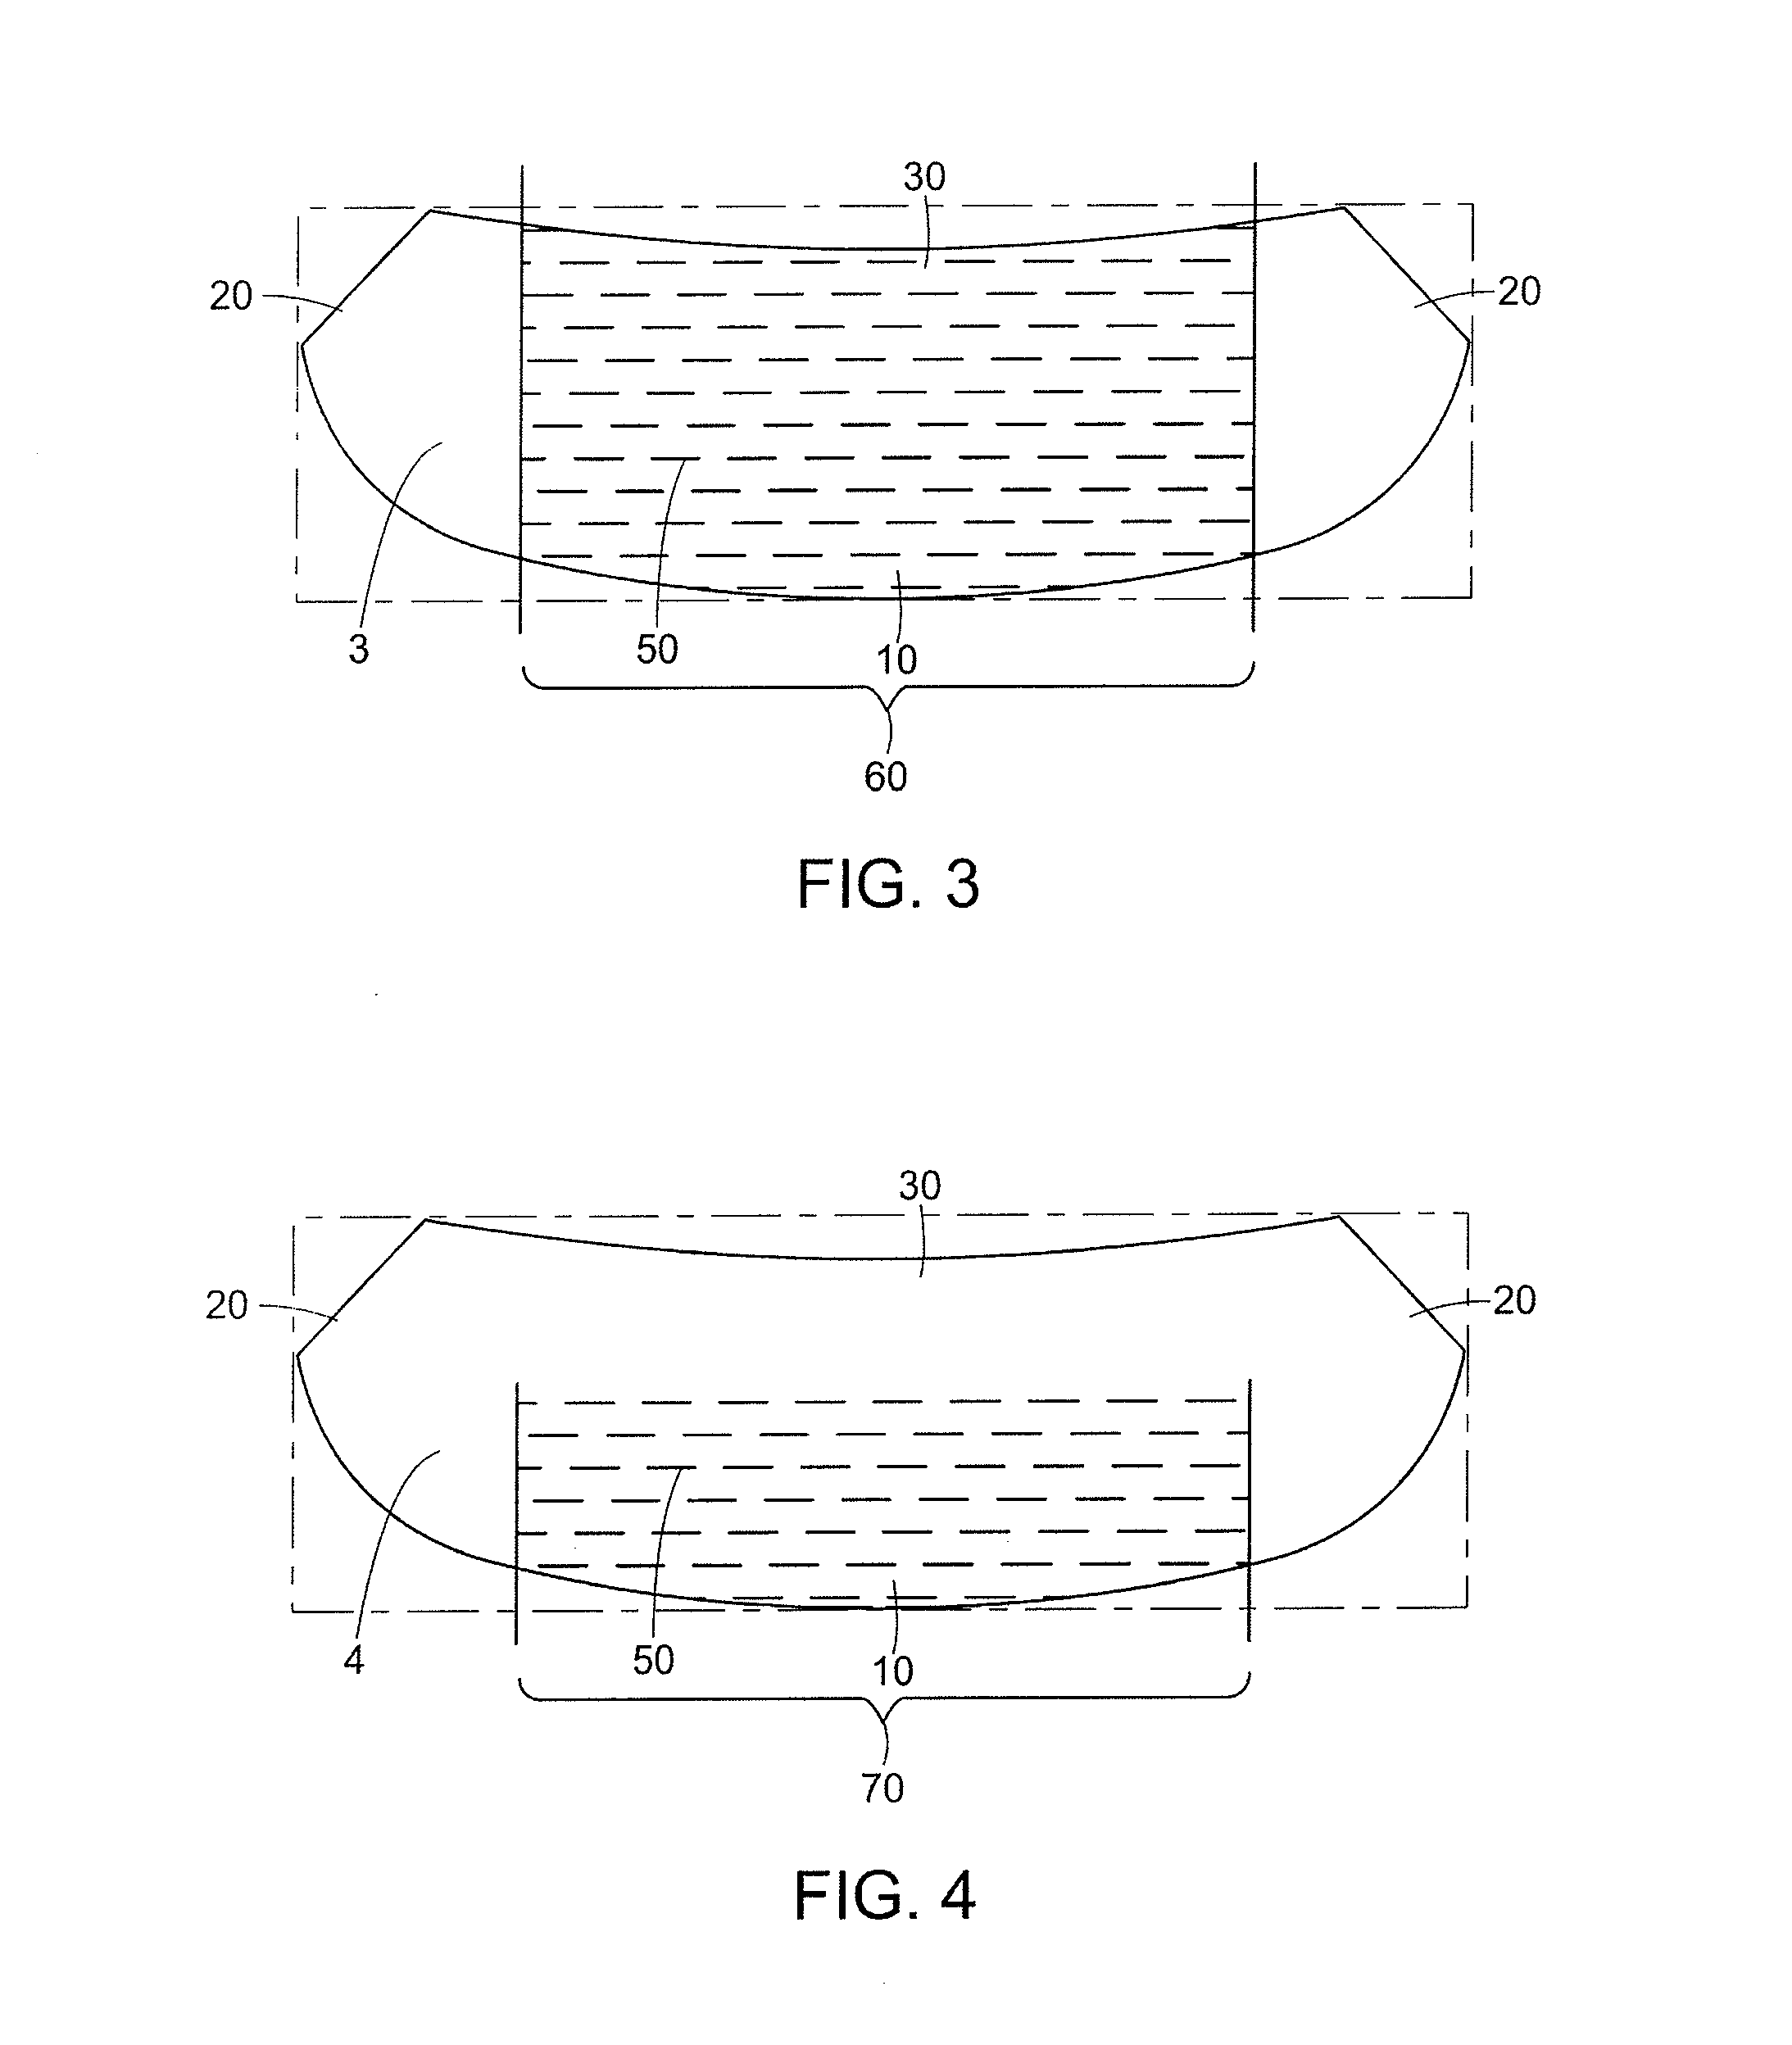 Mastopexy and Breast Reconstruction Prostheses and Method